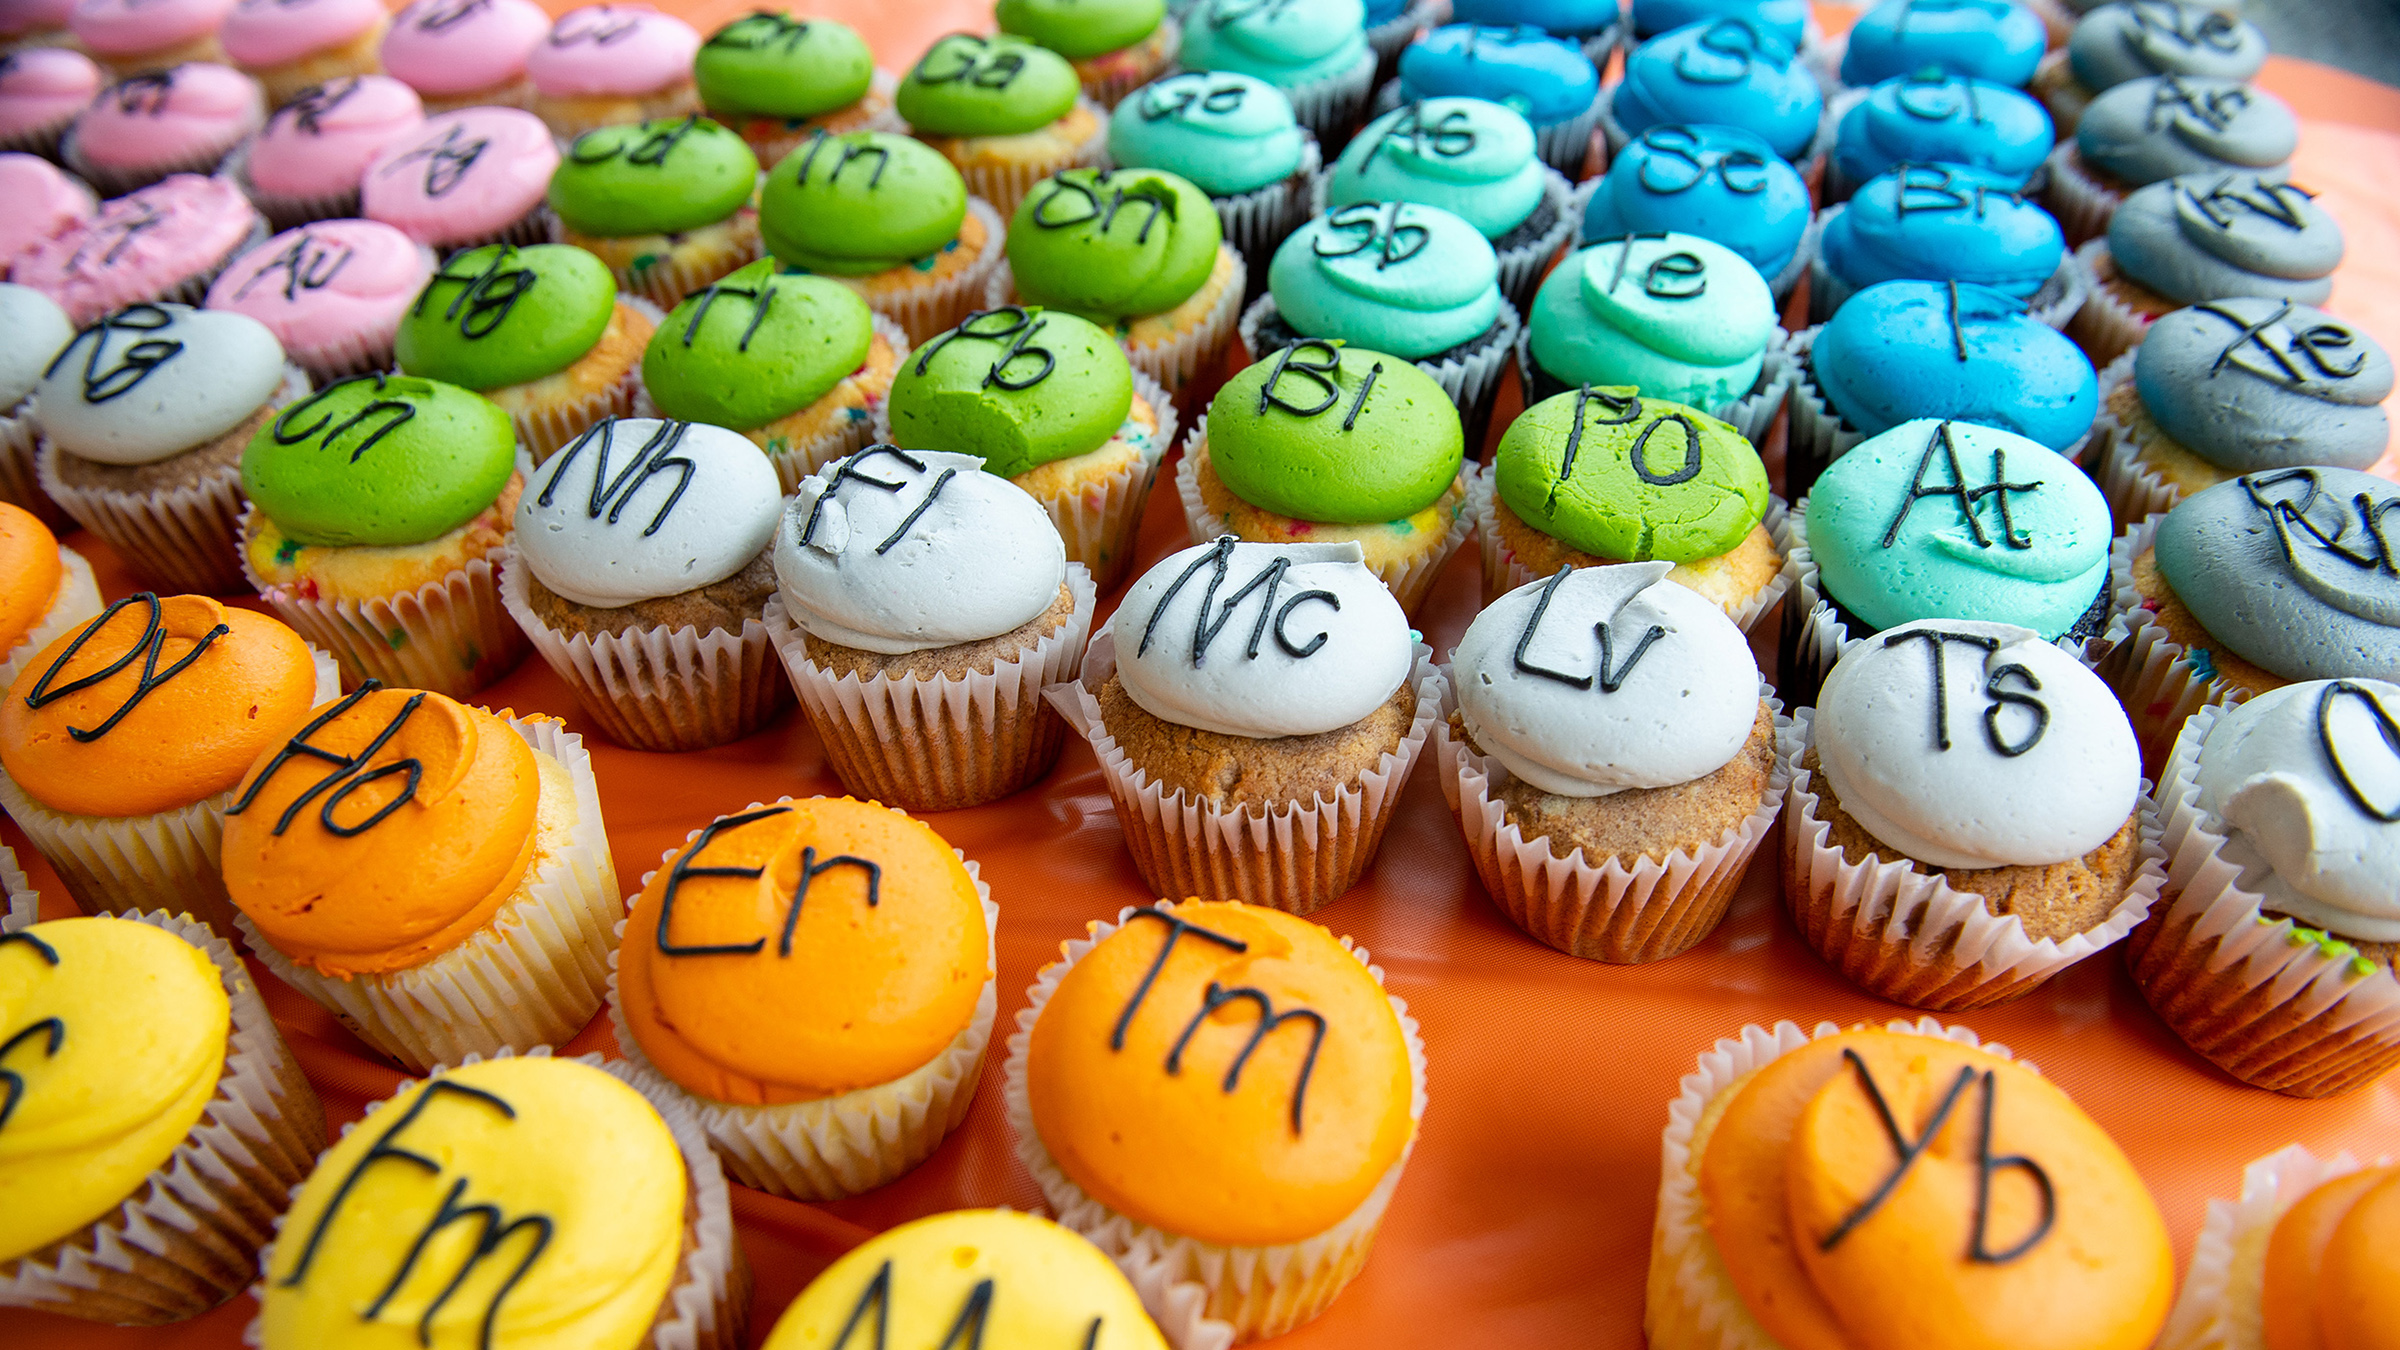 A series of cupcakes arranged to look like the periodic table